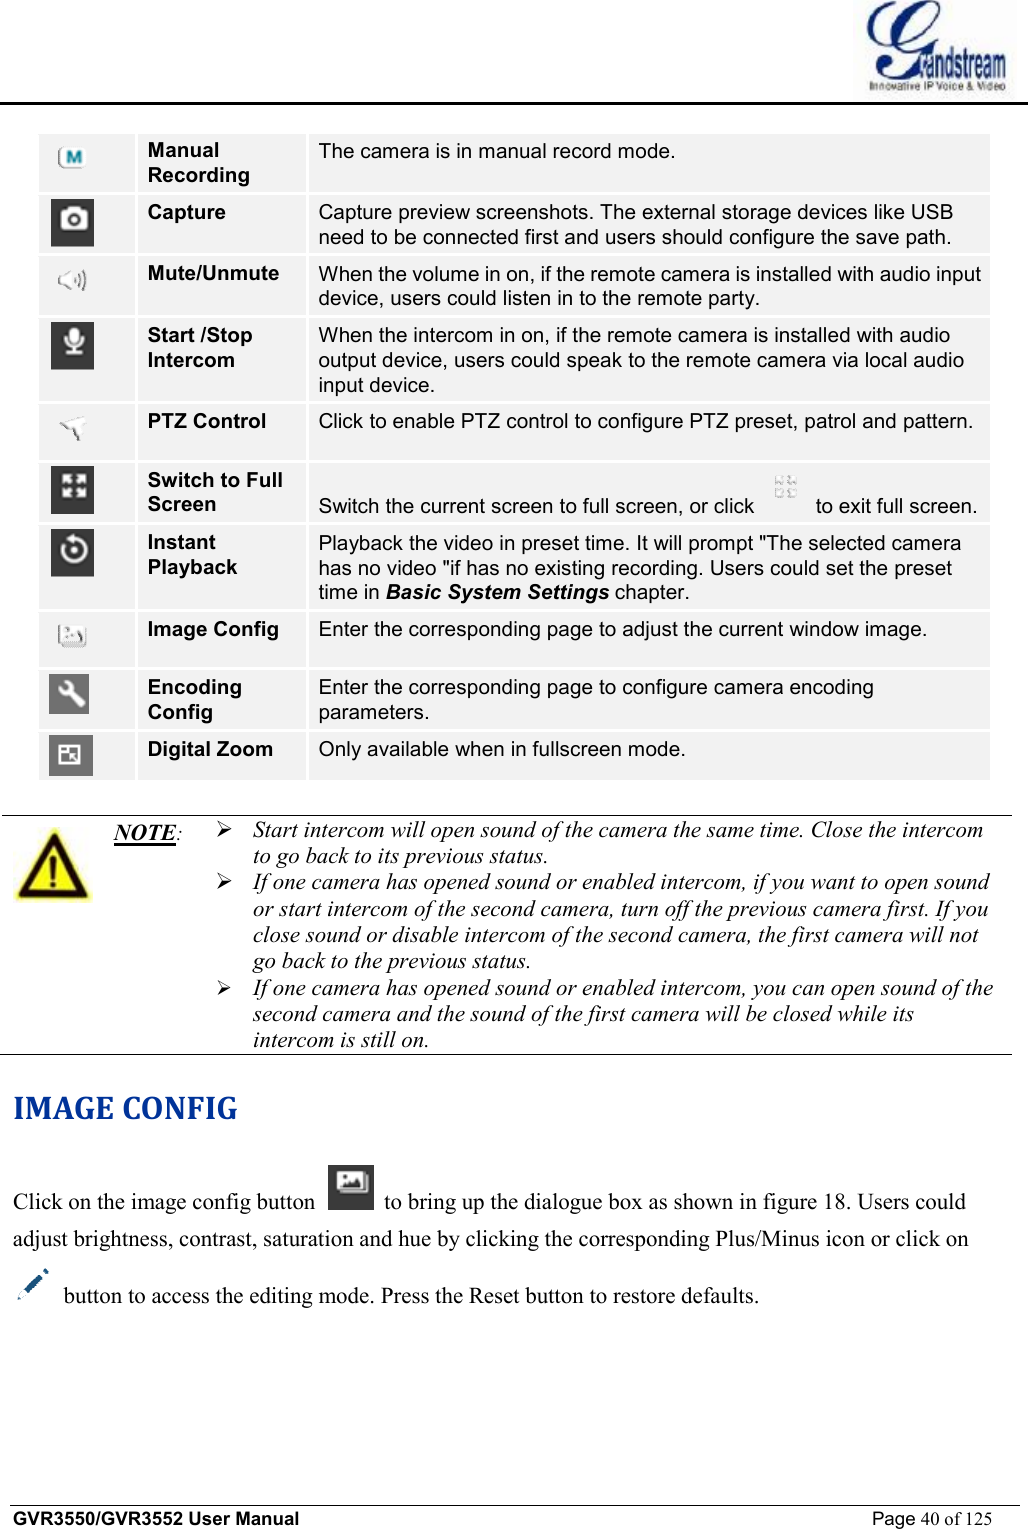    GVR3550/GVR3552 User Manual                                                             Page 40 of 125         Manual Recording The camera is in manual record mode.  Capture Capture preview screenshots. The external storage devices like USB need to be connected first and users should configure the save path.  Mute/Unmute  When the volume in on, if the remote camera is installed with audio input device, users could listen in to the remote party.  Start /Stop Intercom When the intercom in on, if the remote camera is installed with audio output device, users could speak to the remote camera via local audio input device.  PTZ Control  Click to enable PTZ control to configure PTZ preset, patrol and pattern.  Switch to Full Screen  Switch the current screen to full screen, or click   to exit full screen.  Instant Playback Playback the video in preset time. It will prompt &quot;The selected camera has no video &quot;if has no existing recording. Users could set the preset time in Basic System Settings chapter.  Image Config  Enter the corresponding page to adjust the current window image.  Encoding Config Enter the corresponding page to configure camera encoding parameters.  Digital Zoom  Only available when in fullscreen mode.   NOTE:  Ø Start intercom will open sound of the camera the same time. Close the intercom to go back to its previous status. Ø If one camera has opened sound or enabled intercom, if you want to open sound or start intercom of the second camera, turn off the previous camera first. If you close sound or disable intercom of the second camera, the first camera will not go back to the previous status. Ø If one camera has opened sound or enabled intercom, you can open sound of the second camera and the sound of the first camera will be closed while its intercom is still on. IMAGE CONFIG Click on the image config button   to bring up the dialogue box as shown in figure 18. Users could adjust brightness, contrast, saturation and hue by clicking the corresponding Plus/Minus icon or click on  button to access the editing mode. Press the Reset button to restore defaults. 